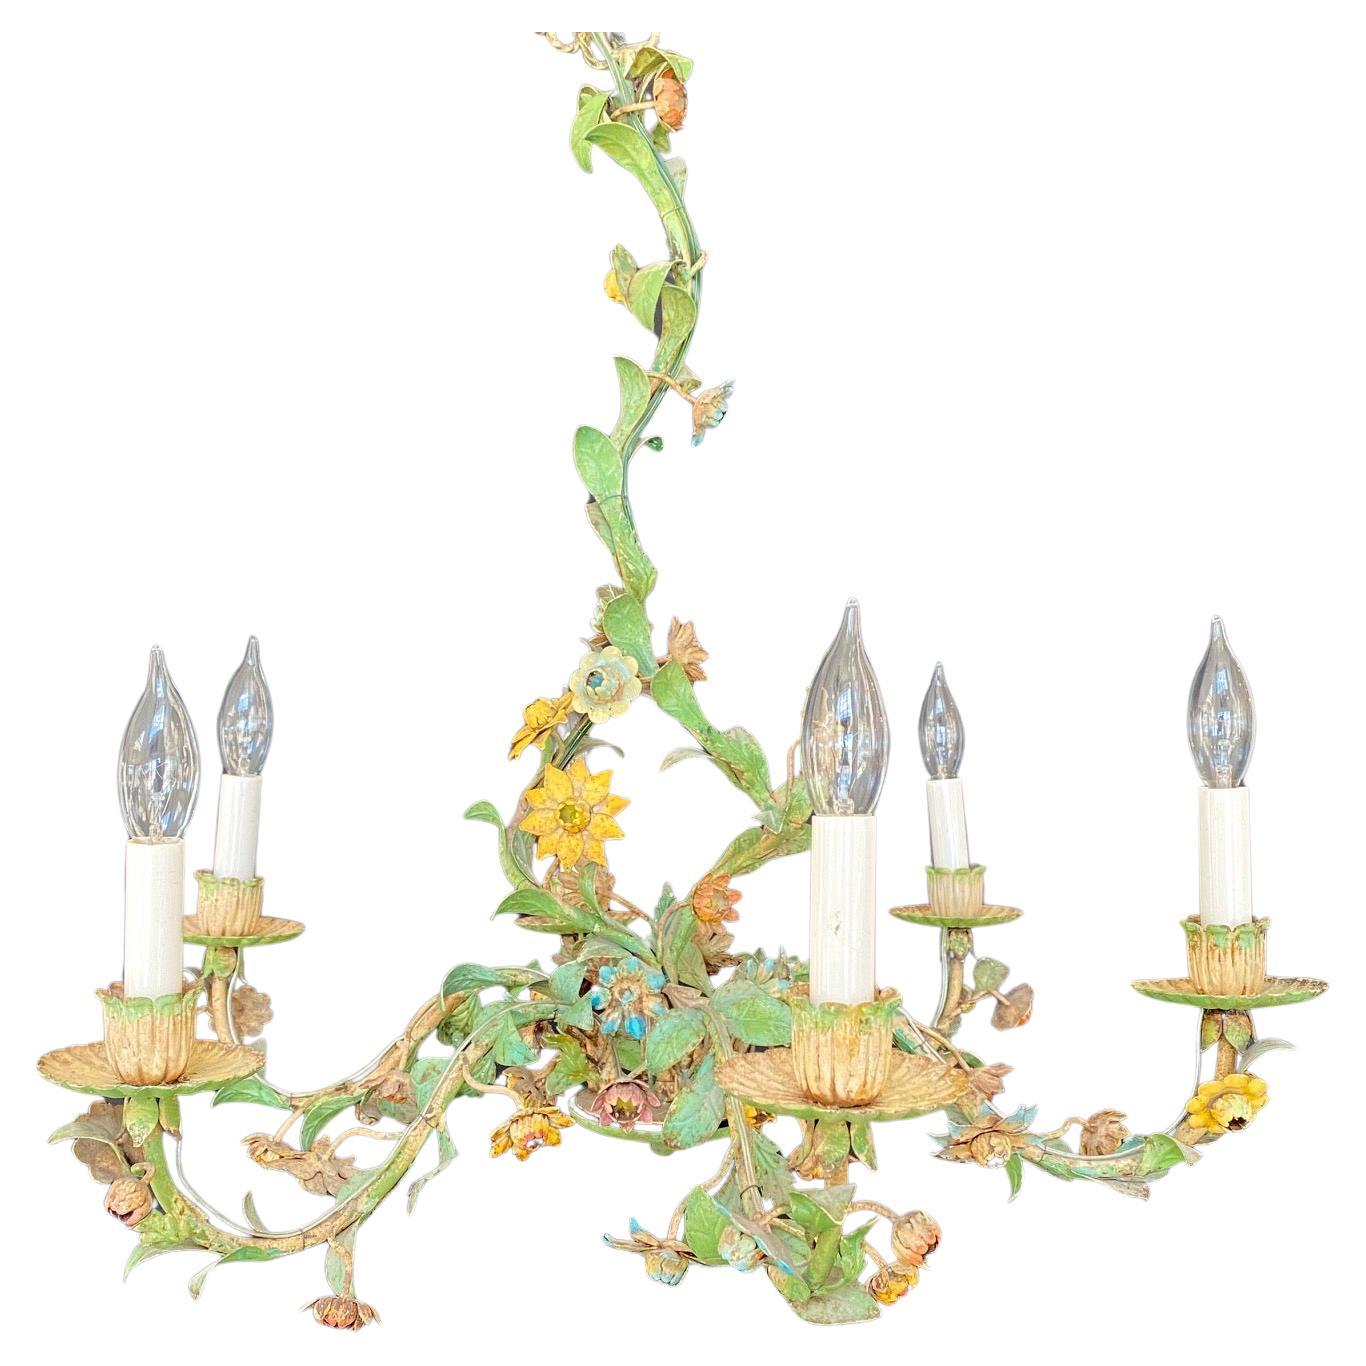 Lovely Hollywood Regency painted tole floral chandelier with leaves and vines made in Italy. Mid-20th century Italian tole floral six-arm chandelier. This charming hand painted chandelier has scrolling green leaves and lovely pink flowers. 
#6279

